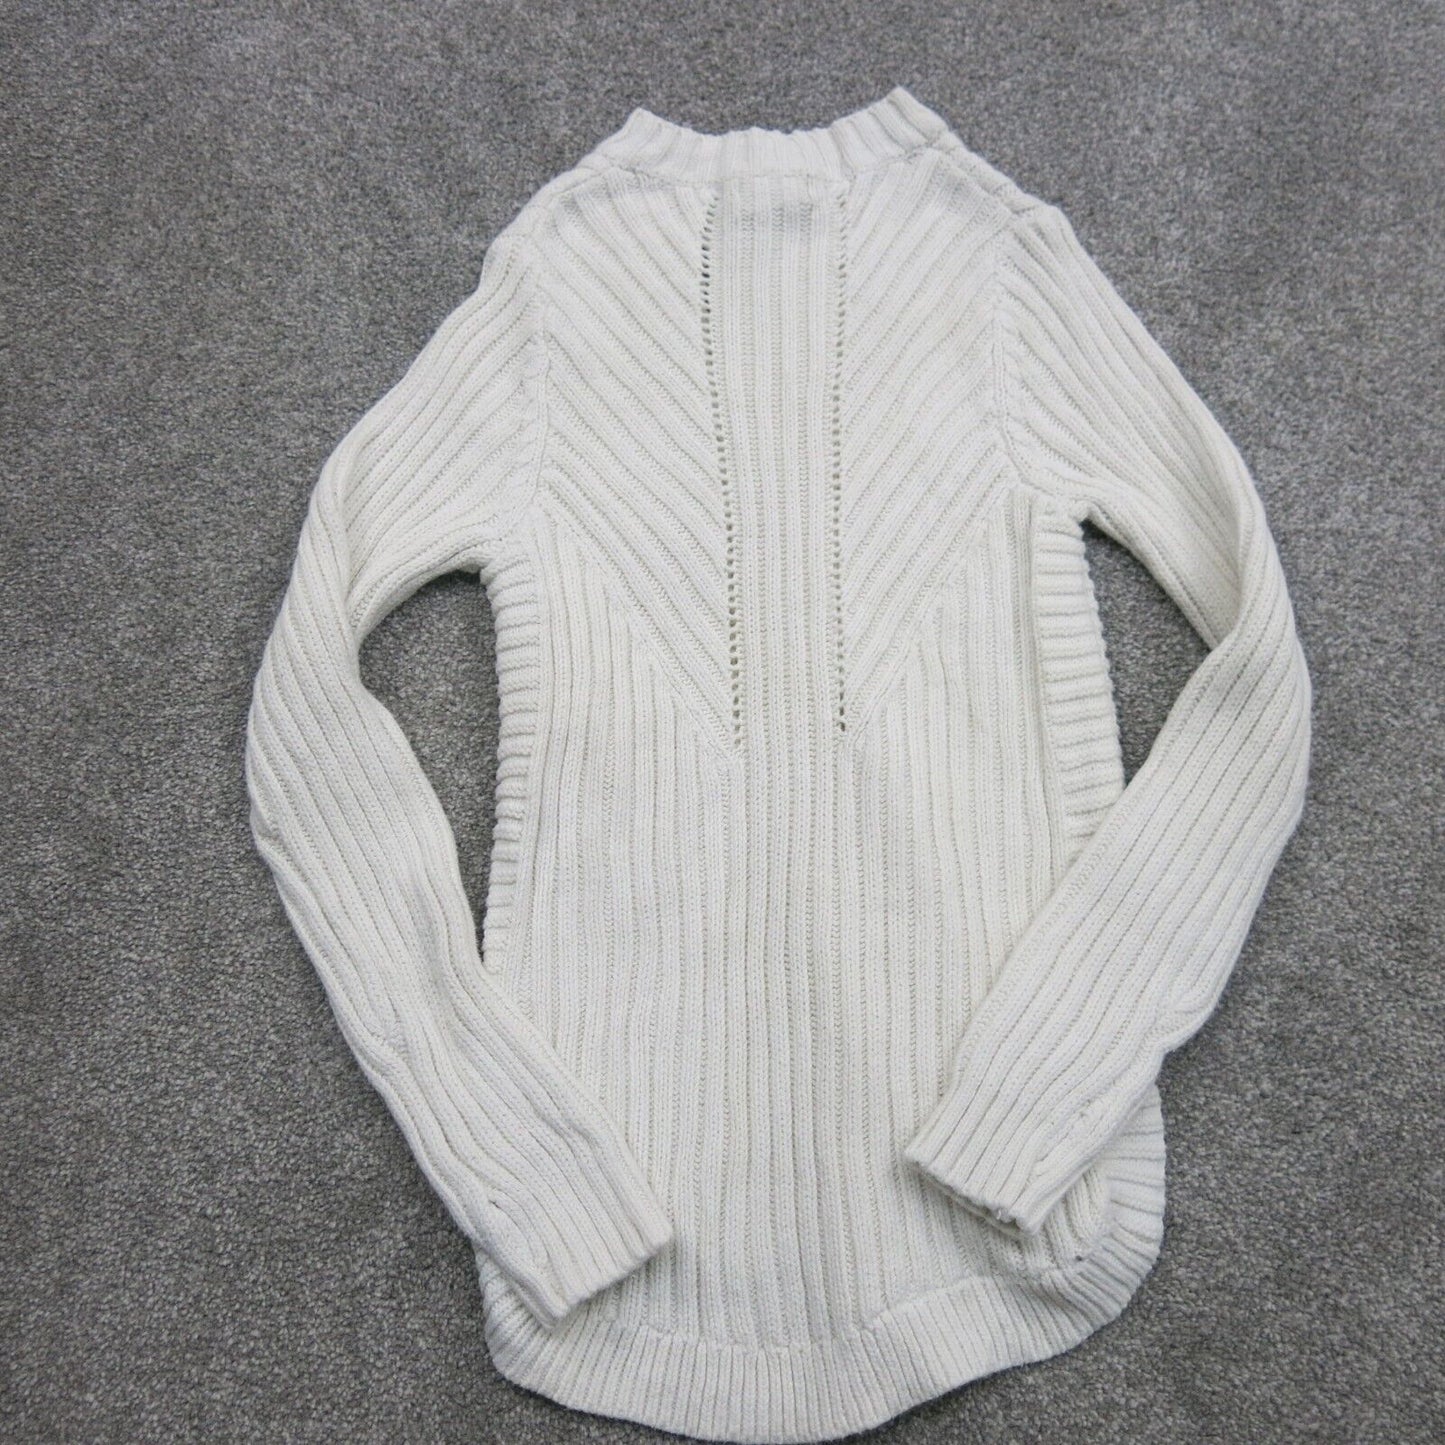 Tahari Sweater Womens Size Medium White Solid Pullover Long Sleeve Everyday Top